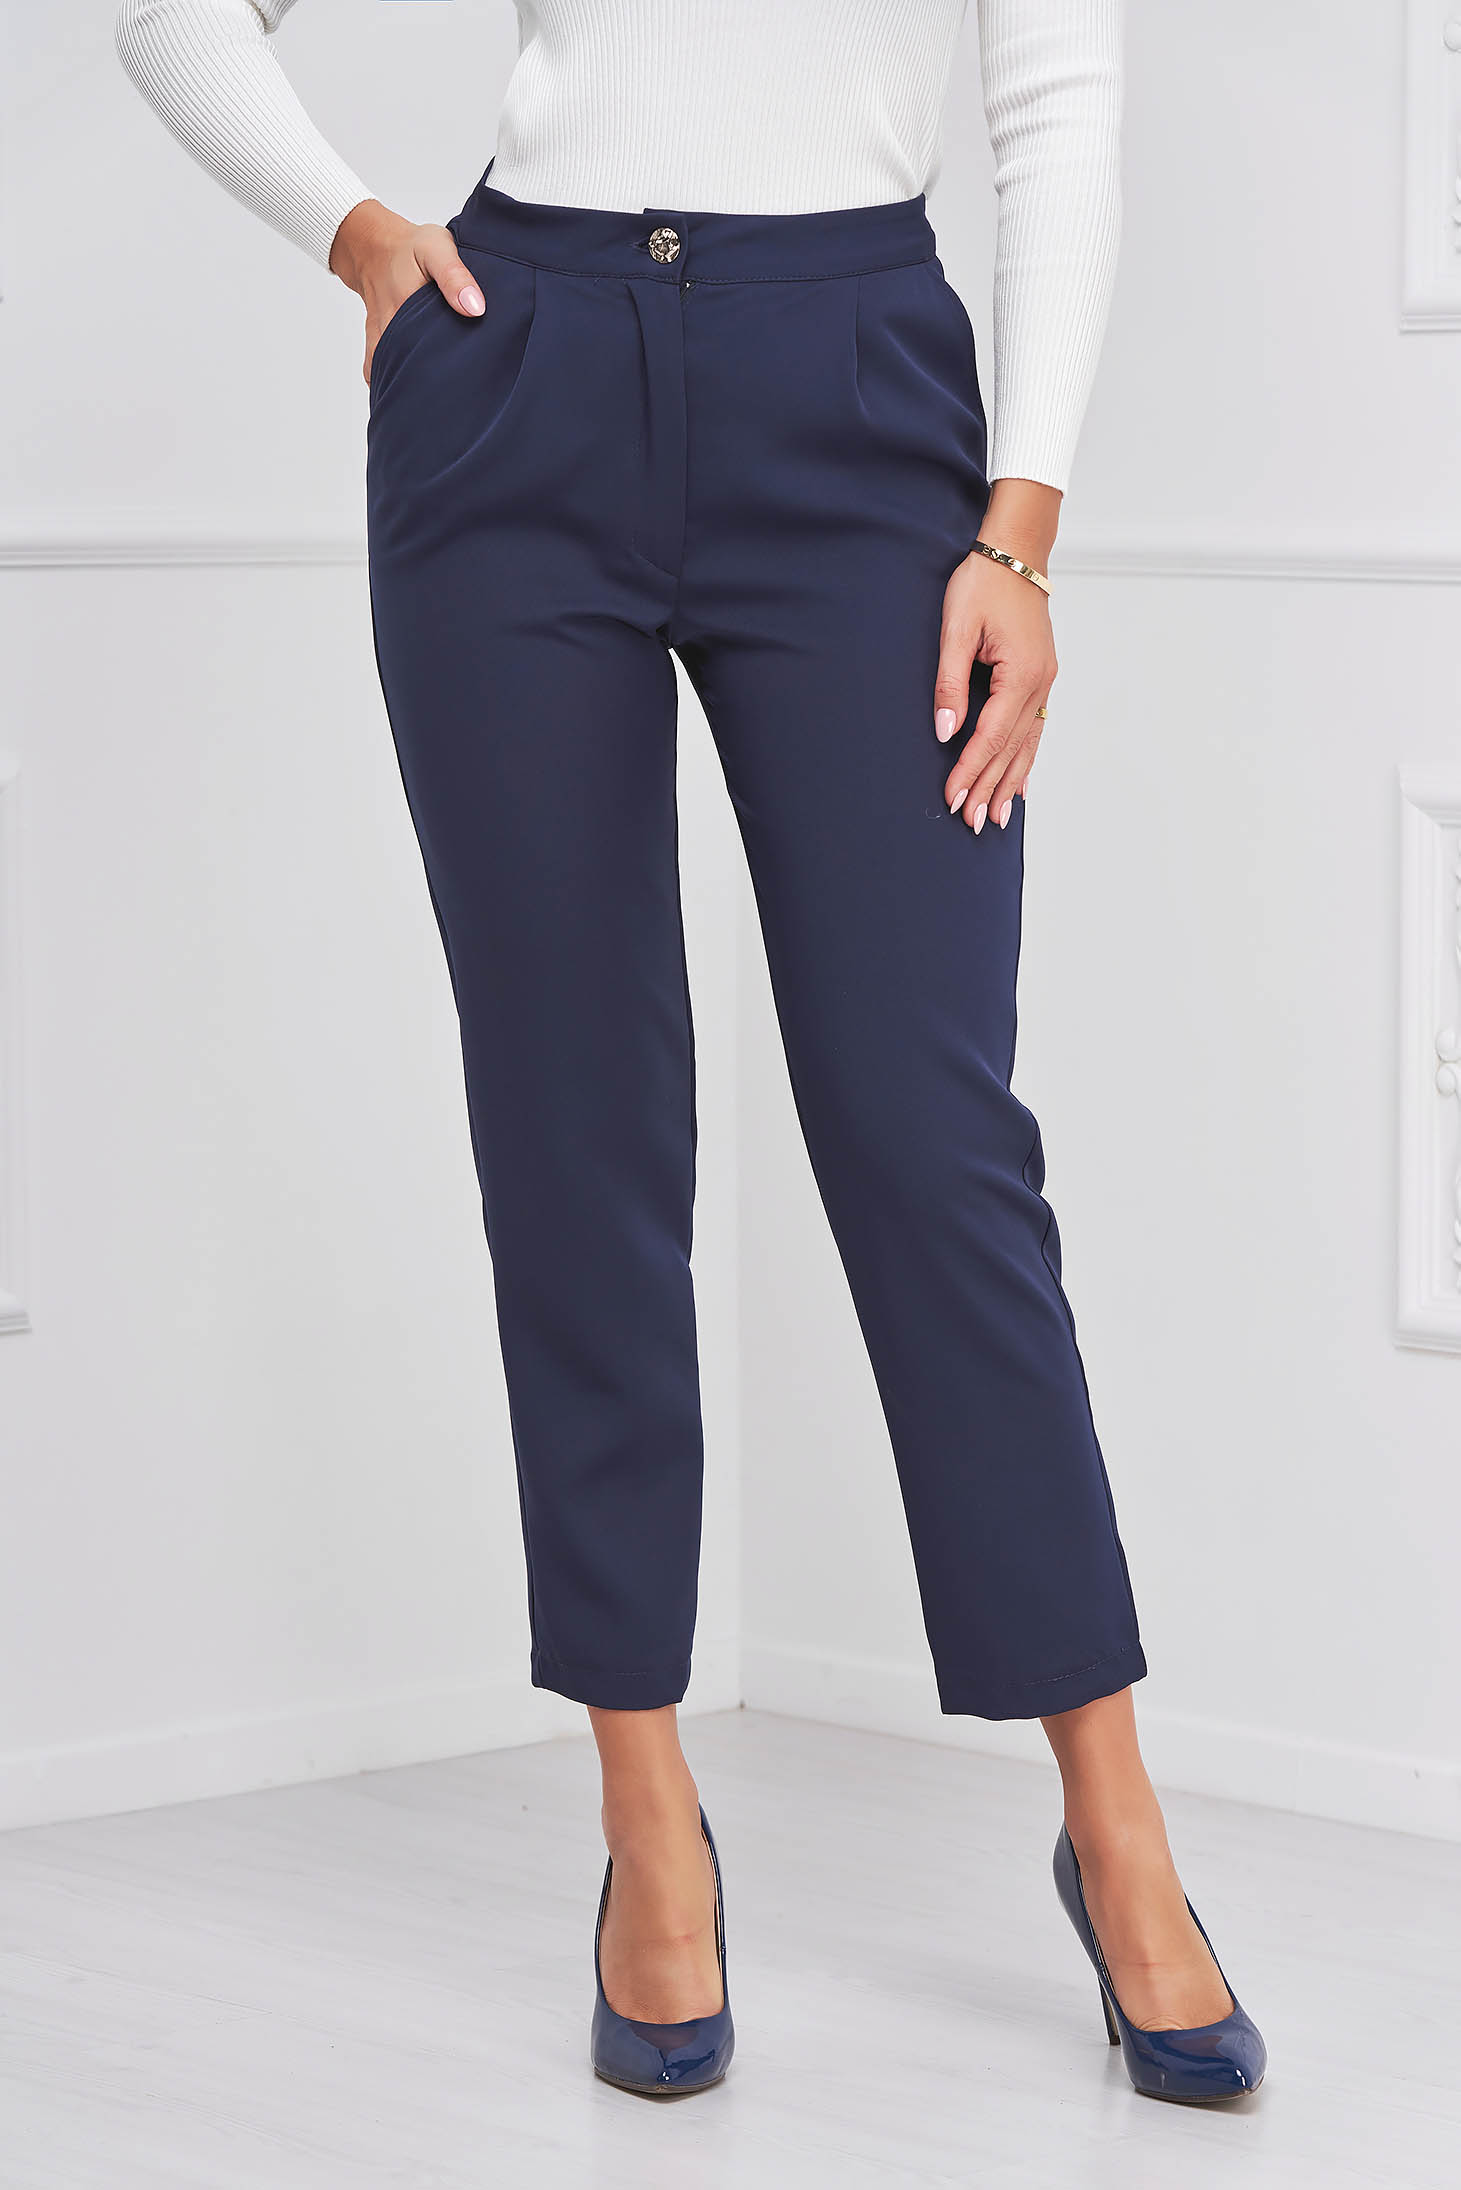 - StarShinerS dark blue trousers conical medium waist elastic cloth lateral pockets